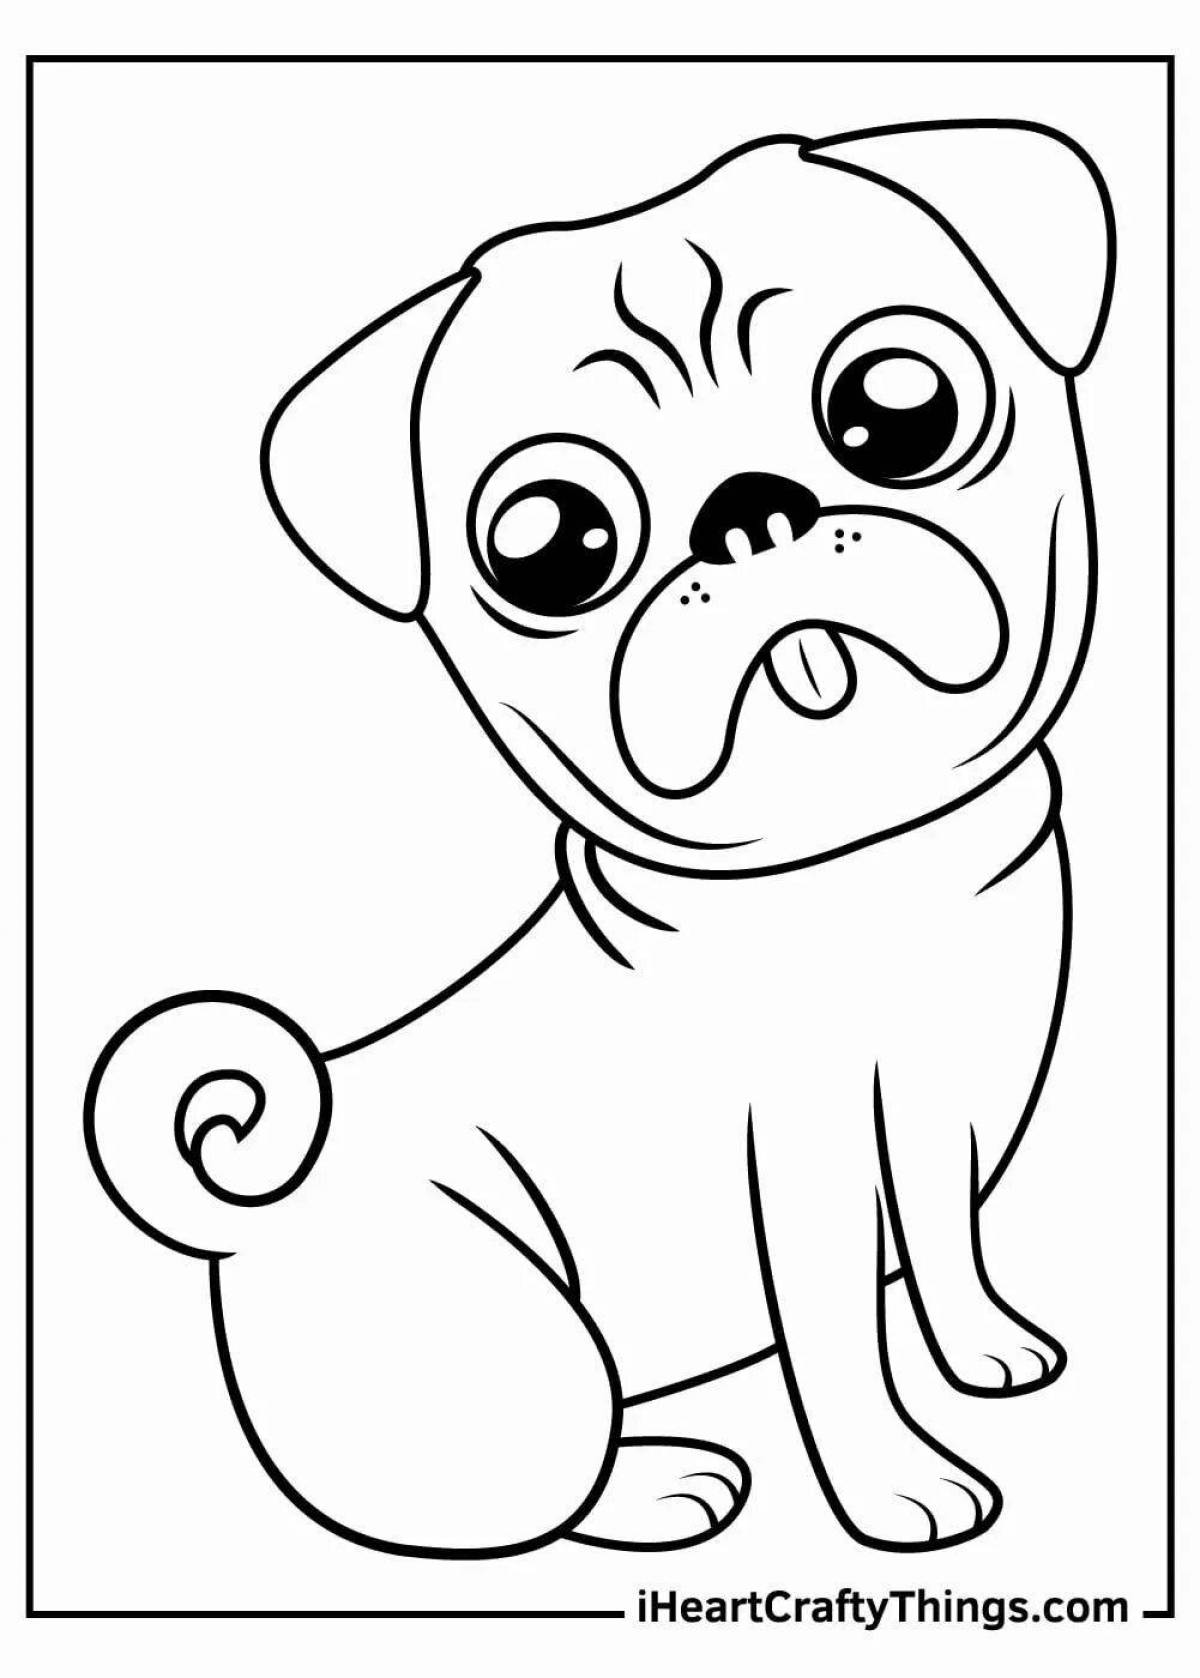 Inspirational pug coloring book for kids